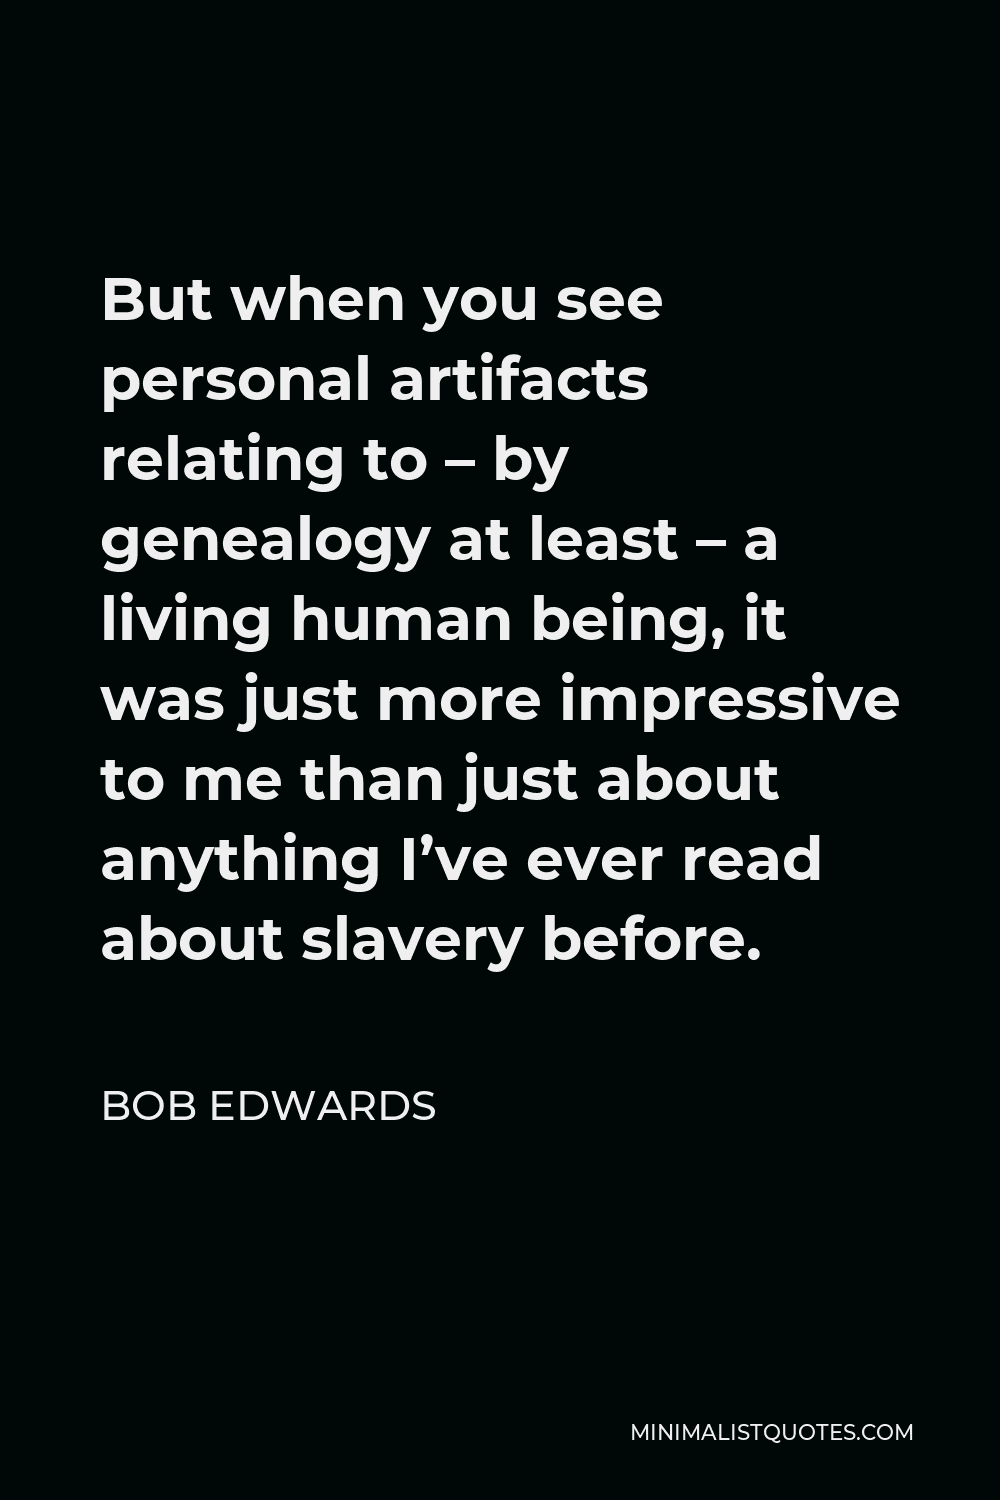 Bob Edwards Quote - But when you see personal artifacts relating to – by genealogy at least – a living human being, it was just more impressive to me than just about anything I’ve ever read about slavery before.